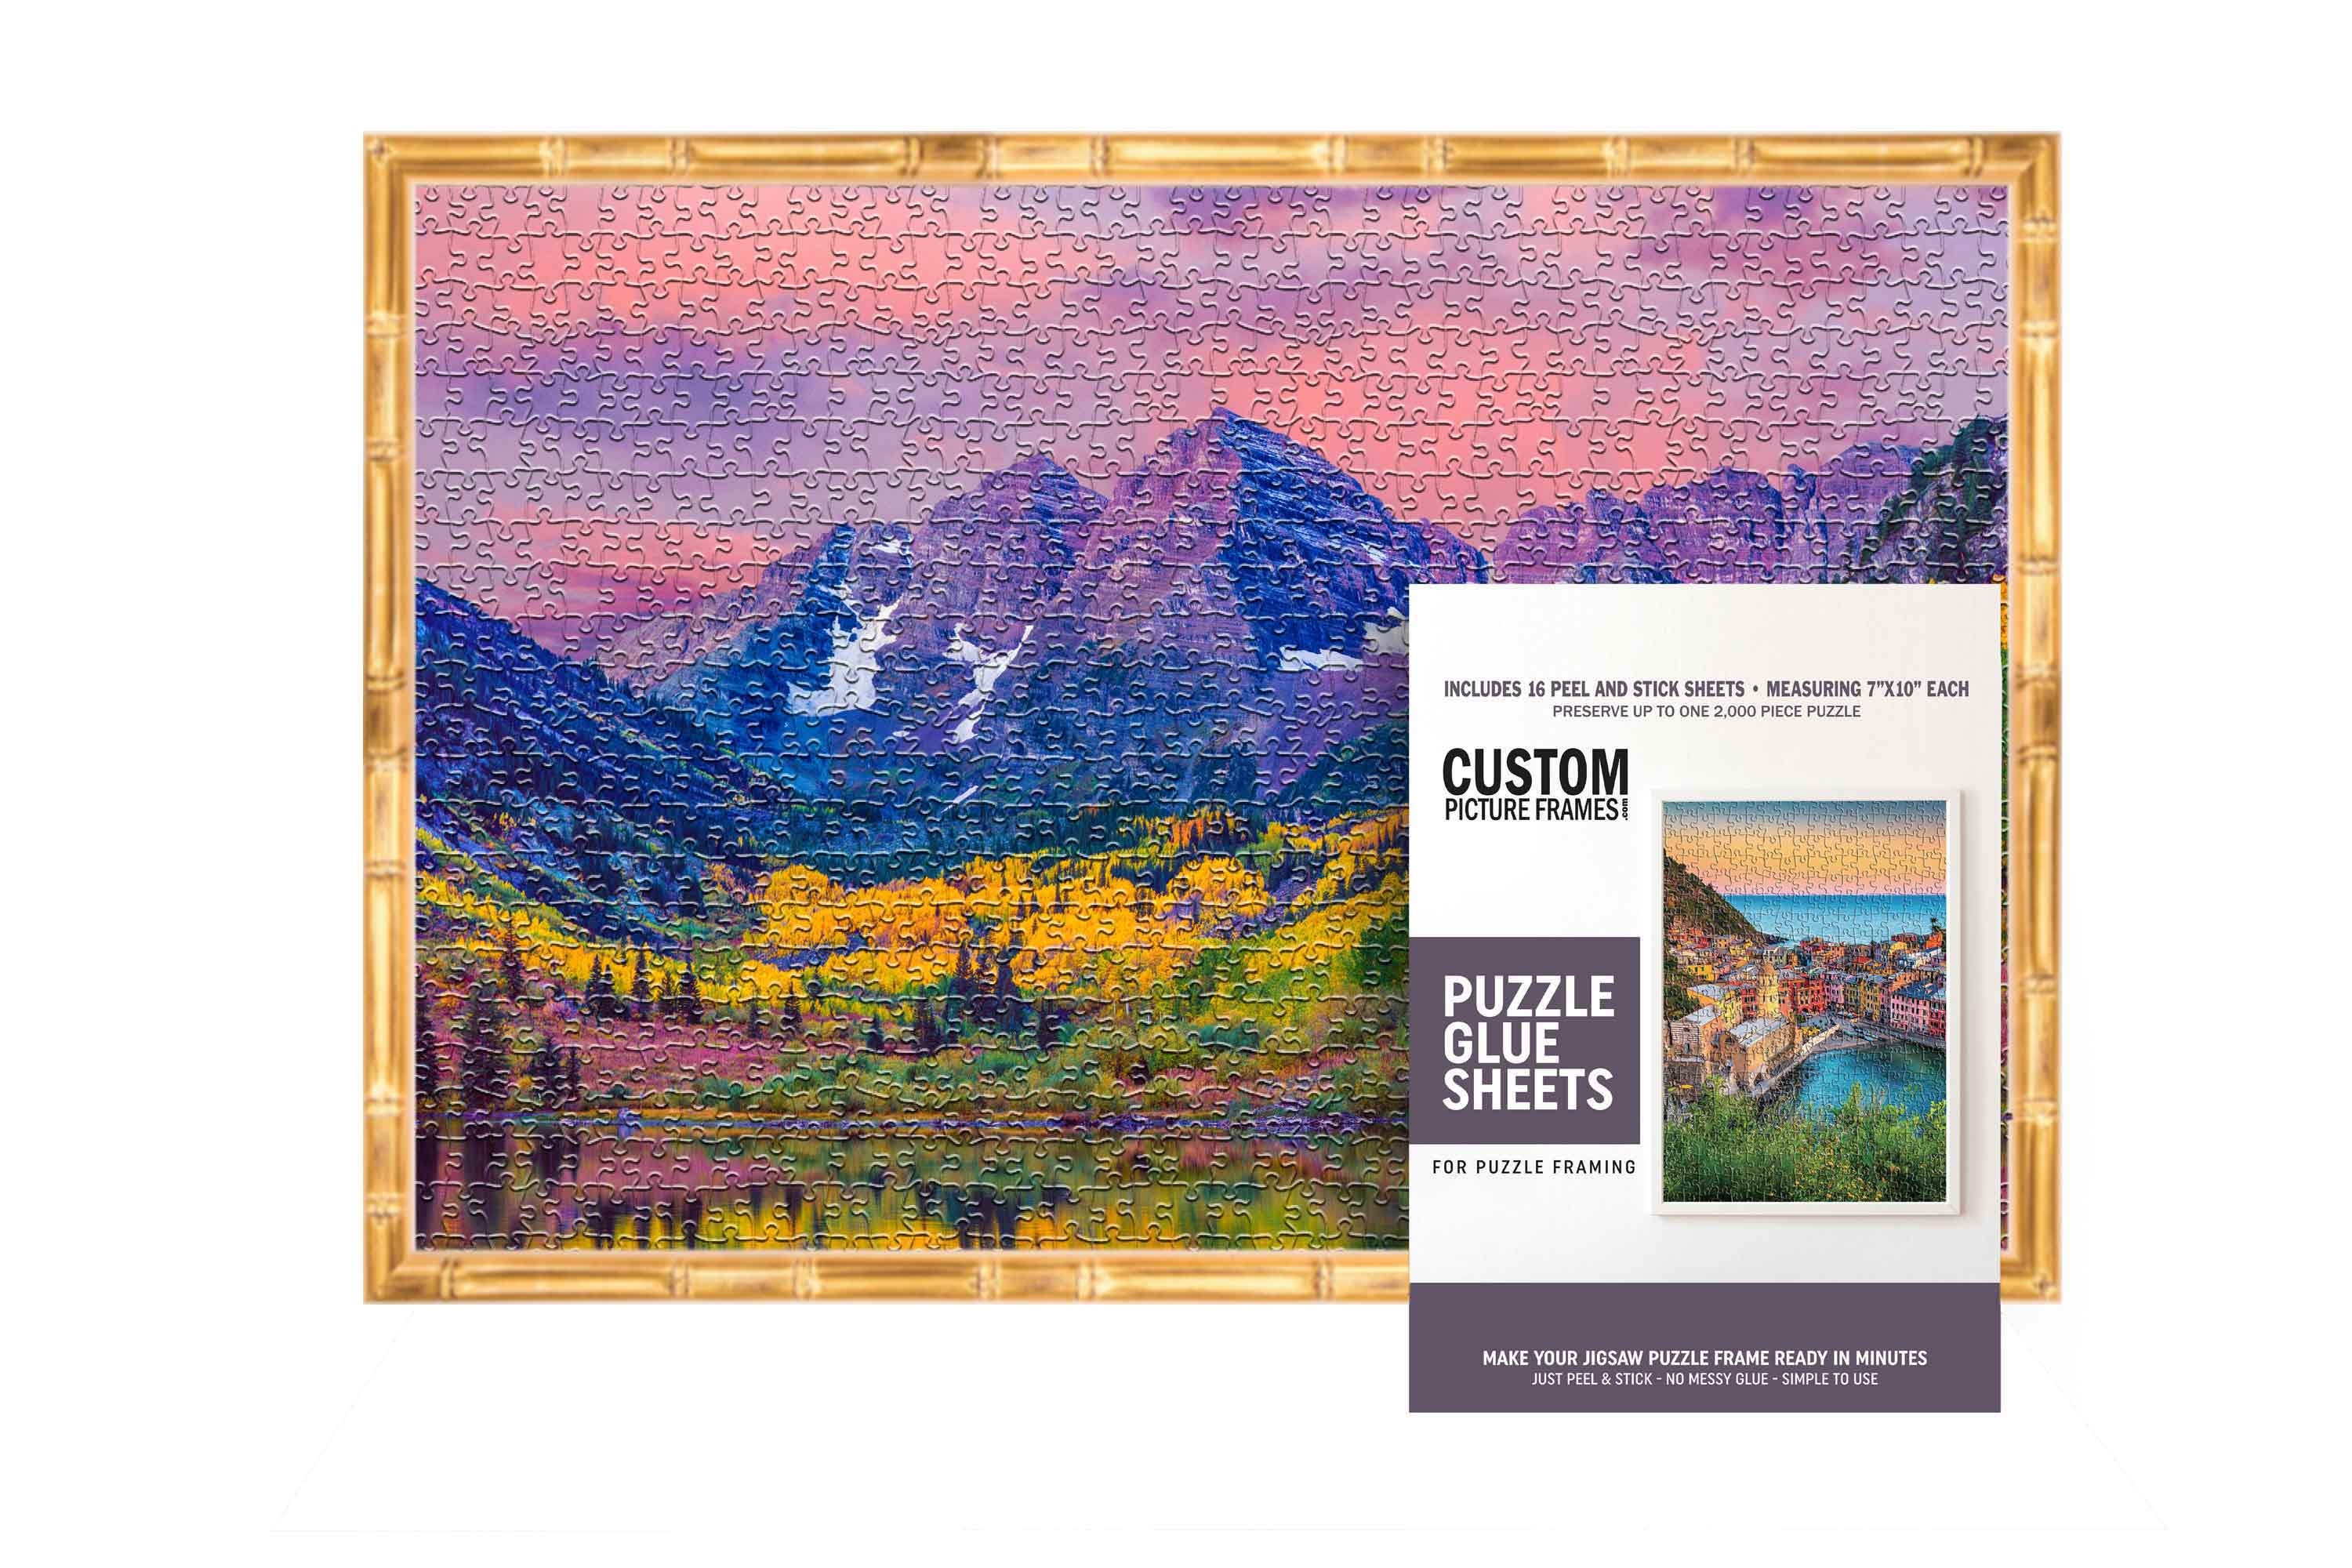 Jigsaw Puzzle Frame Kit With Frame and Puzzle Glue Sheets - Etsy Canada